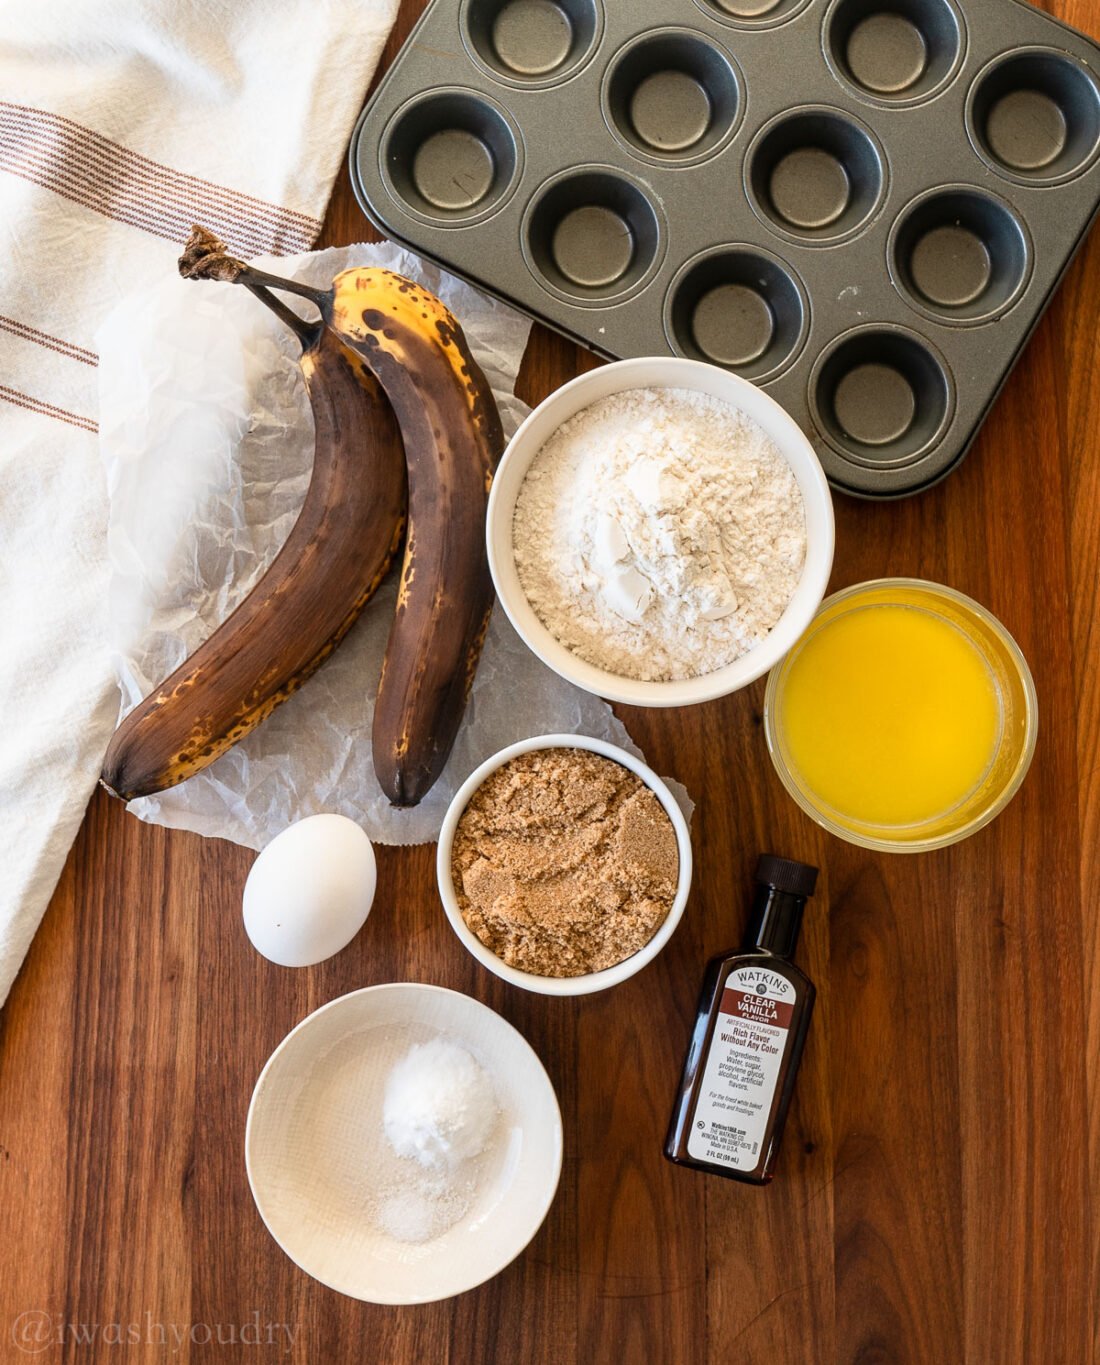 Ingredients for banana muffins on wooden surface with muffin tin.